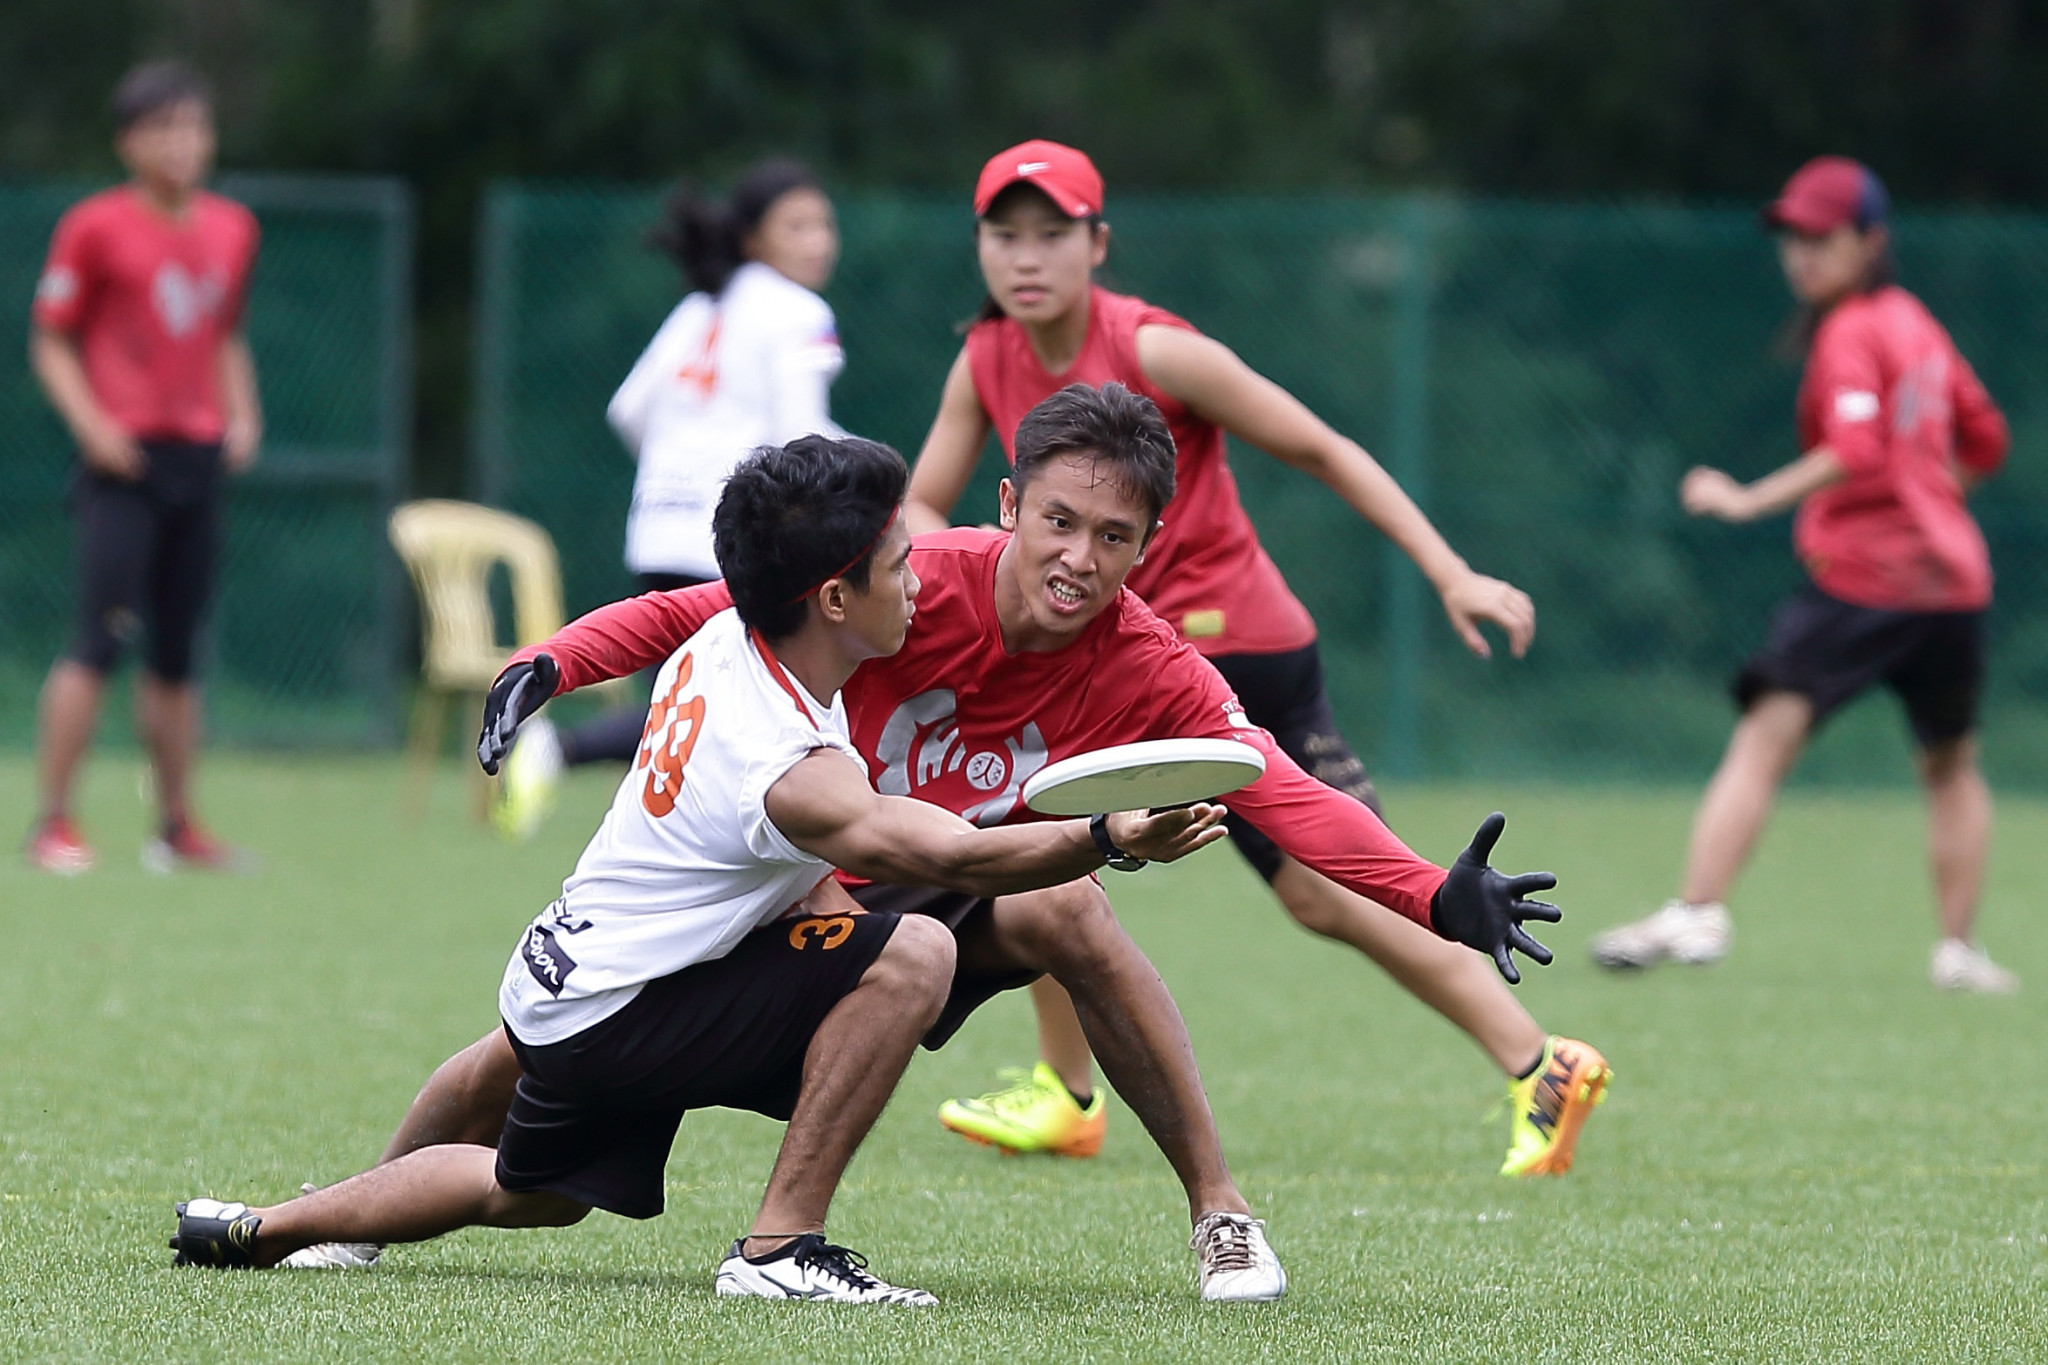 Shanghai to host 2019 Asia Oceanic Ultimate and Guts Championships